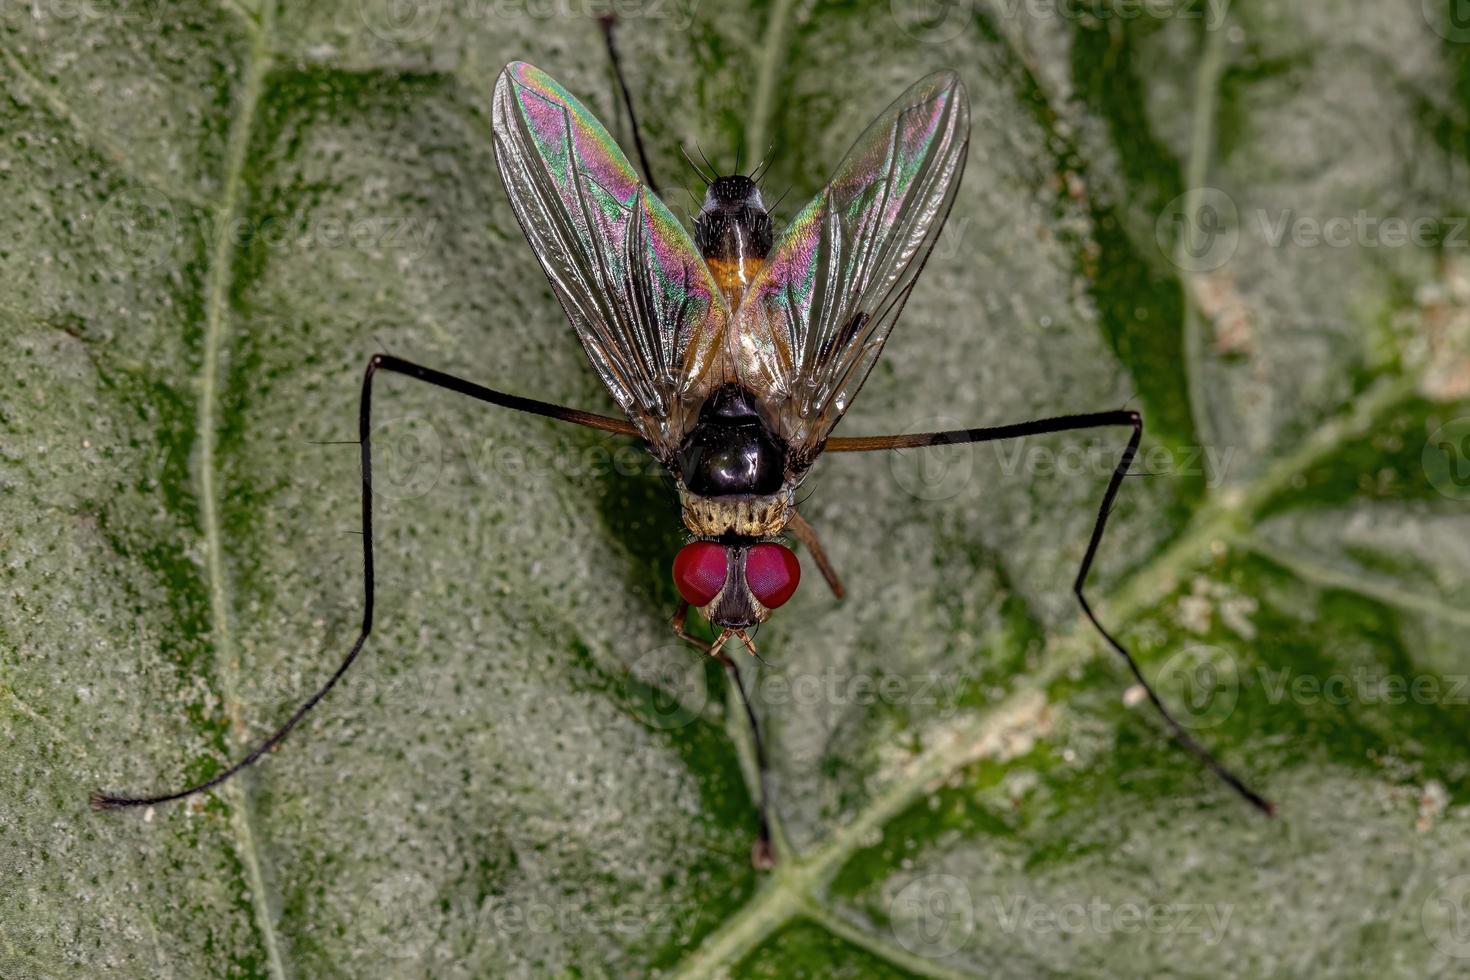 Adult Bristle Fly photo